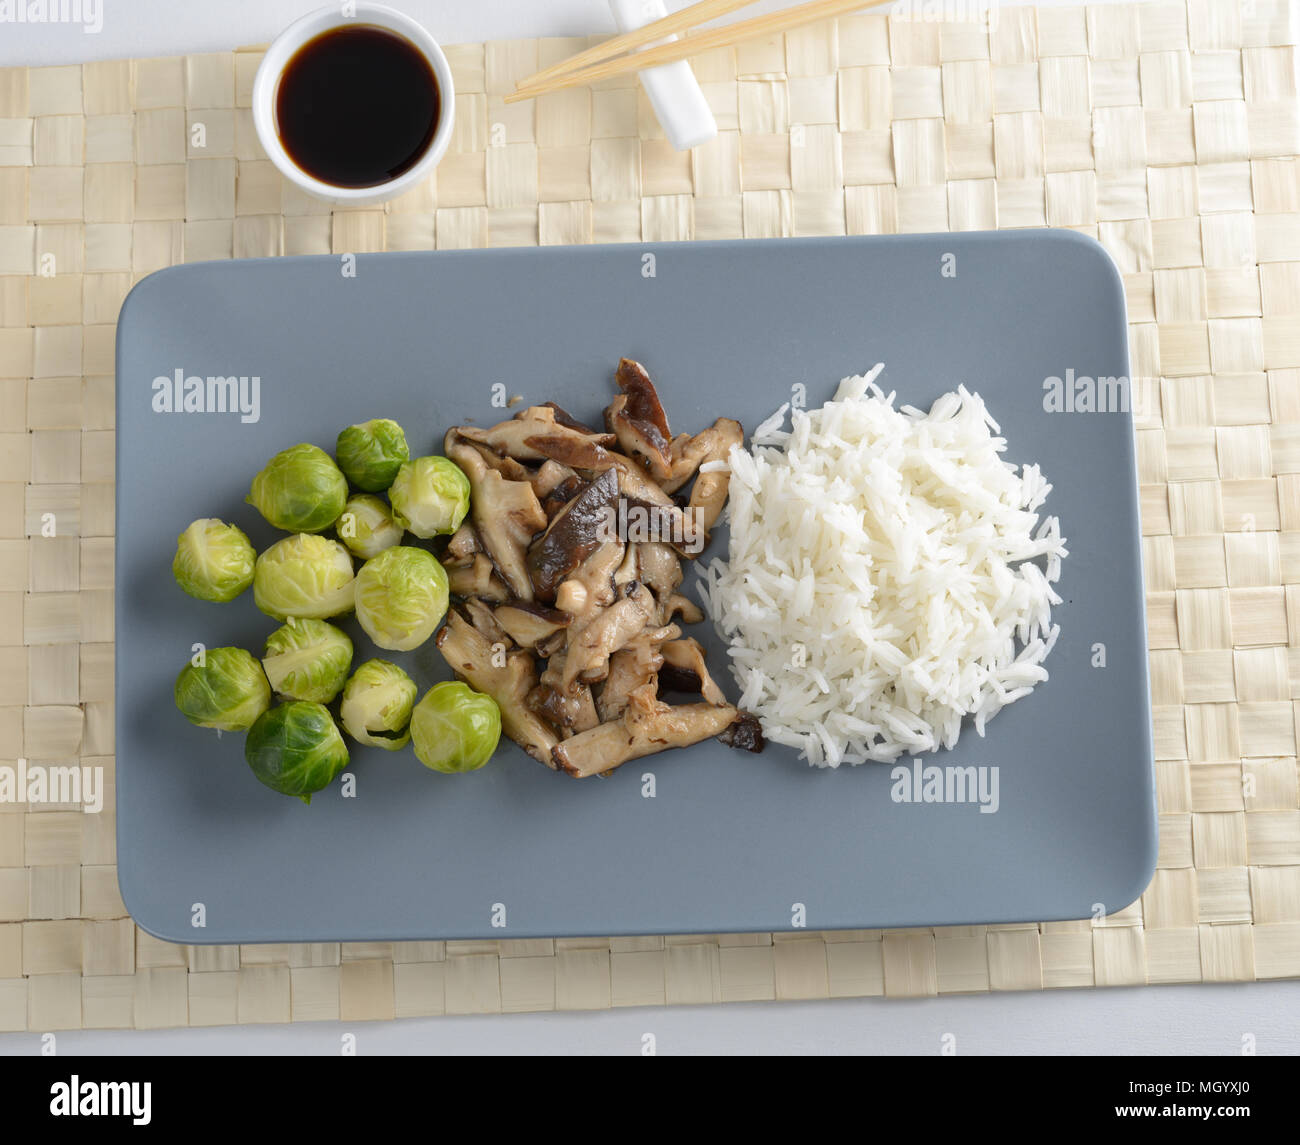 Shiitake with rice and Brussel sprout Stock Photo